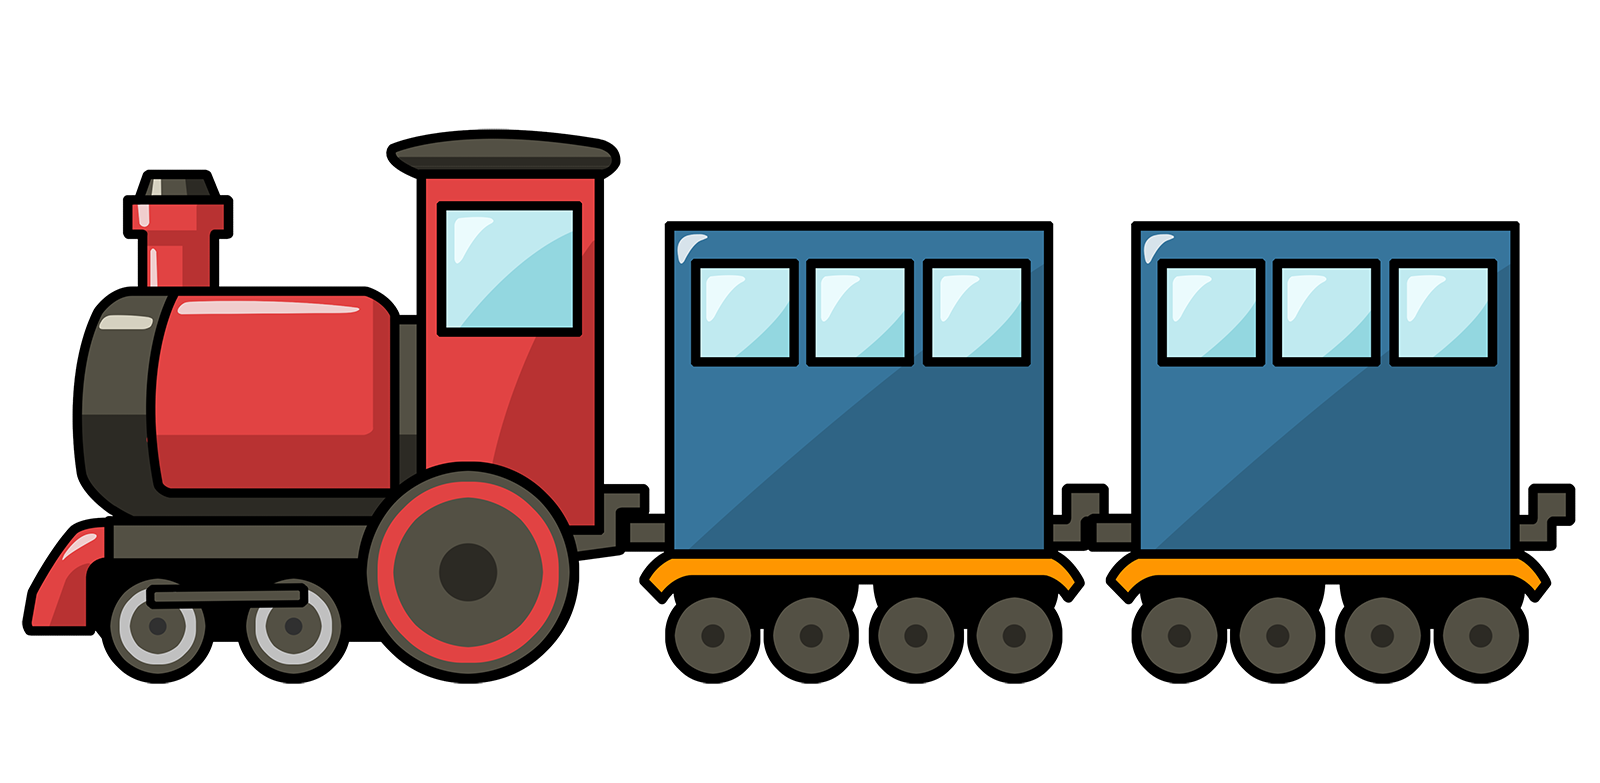 Images For > Train Engine And Caboose Clipart